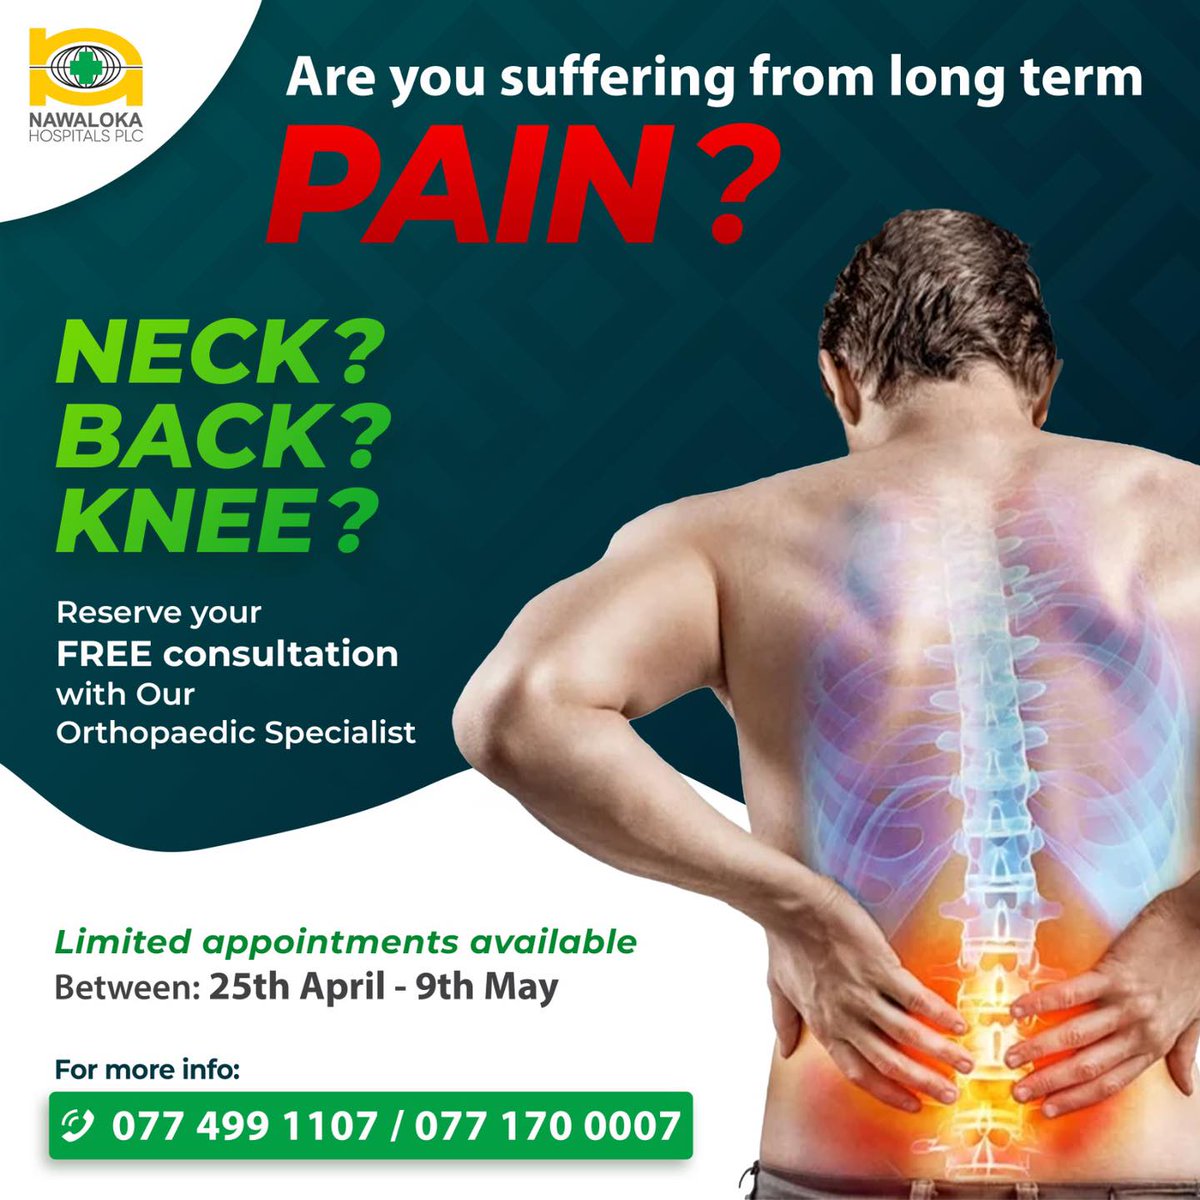 FREE Consultation with our Orthopaedic Specialist

#Nawaloka #NawalokaHospitals #NawalokaHospitalColombo #Orthopaedic #Orthopaedics #OrthopedicSurgery